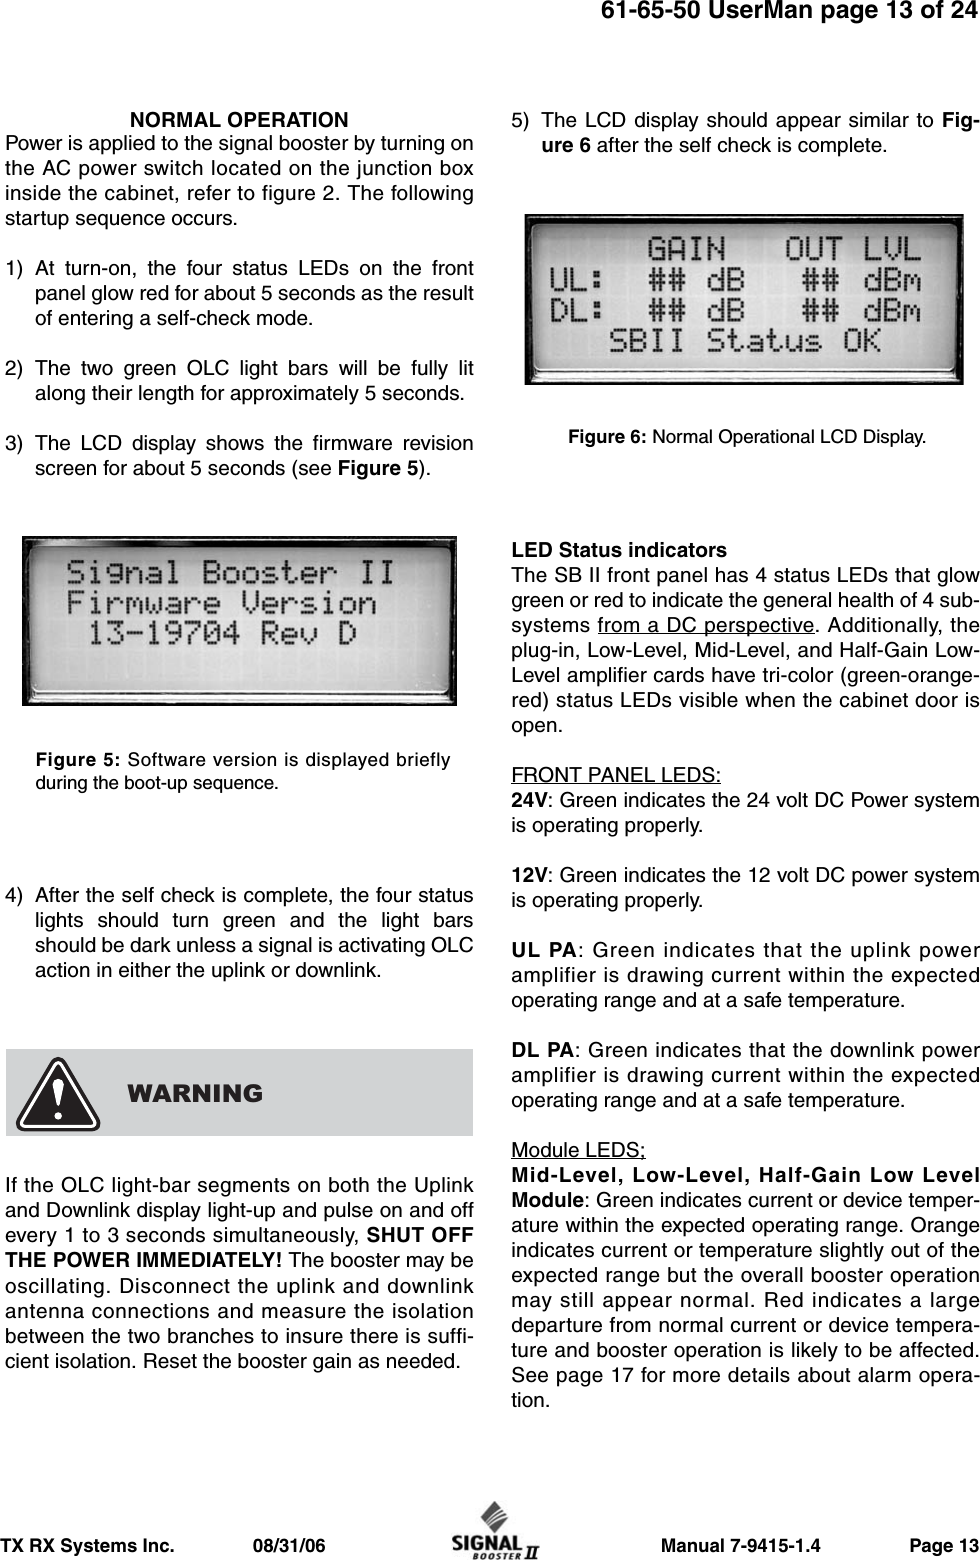                     Manual 7-9415-1.4                 Page 13TX RX Systems Inc.               08/31/0661-65-50 UserMan page 13 of 24NORMAL OPERATIONPower is applied to the signal booster by turning onthe AC power switch located on the junction boxinside the cabinet, refer to figure 2. The followingstartup sequence occurs.1) At turn-on, the four status LEDs on the frontpanel glow red for about 5 seconds as the resultof entering a self-check mode.2) The two green OLC light bars will be fully litalong their length for approximately 5 seconds.3) The LCD display shows the firmware revisionscreen for about 5 seconds (see Figure 5).4) After the self check is complete, the four statuslights should turn green and the light barsshould be dark unless a signal is activating OLCaction in either the uplink or downlink.If the OLC light-bar segments on both the Uplinkand Downlink display light-up and pulse on and offevery 1 to 3 seconds simultaneously, SHUT OFFTHE POWER IMMEDIATELY! The booster may beoscillating. Disconnect the uplink and downlinkantenna connections and measure the isolationbetween the two branches to insure there is suffi-cient isolation. Reset the booster gain as needed.5) The LCD display should appear similar to Fig-ure 6 after the self check is complete.LED Status indicatorsThe SB II front panel has 4 status LEDs that glowgreen or red to indicate the general health of 4 sub-systems from a DC perspective. Additionally, theplug-in, Low-Level, Mid-Level, and Half-Gain Low-Level amplifier cards have tri-color (green-orange-red) status LEDs visible when the cabinet door isopen.FRONT PANEL LEDS:24V: Green indicates the 24 volt DC Power systemis operating properly.12V: Green indicates the 12 volt DC power systemis operating properly.UL PA: Green indicates that the uplink poweramplifier is drawing current within the expectedoperating range and at a safe temperature.DL PA: Green indicates that the downlink poweramplifier is drawing current within the expectedoperating range and at a safe temperature.Module LEDS;Mid-Level, Low-Level, Half-Gain Low LevelModule: Green indicates current or device temper-ature within the expected operating range. Orangeindicates current or temperature slightly out of theexpected range but the overall booster operationmay still appear normal. Red indicates a largedeparture from normal current or device tempera-ture and booster operation is likely to be affected.See page 17 for more details about alarm opera-tion.WARNINGFigure 6: Normal Operational LCD Display.Figure 5: Software version is displayed brieflyduring the boot-up sequence.